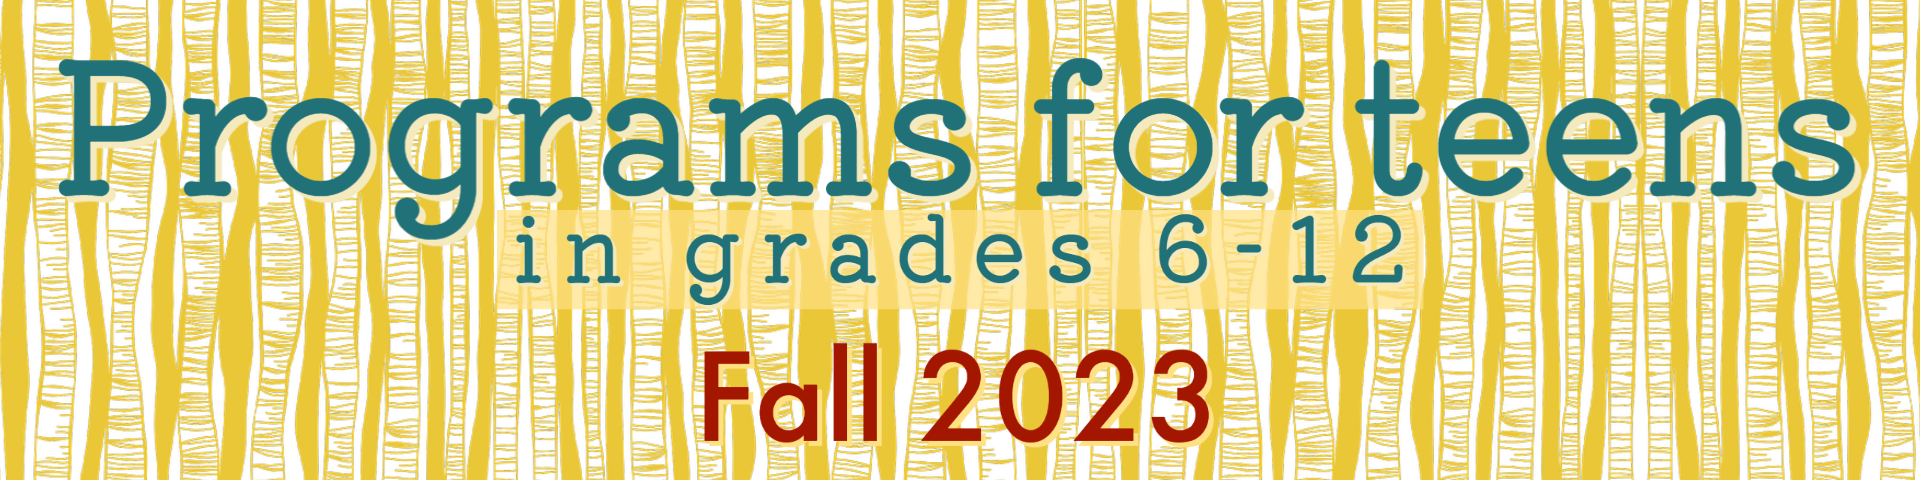 Programs for teens in grades 6-12 for Fall 2023. Background is illustrated yellow trees with blue and red text.